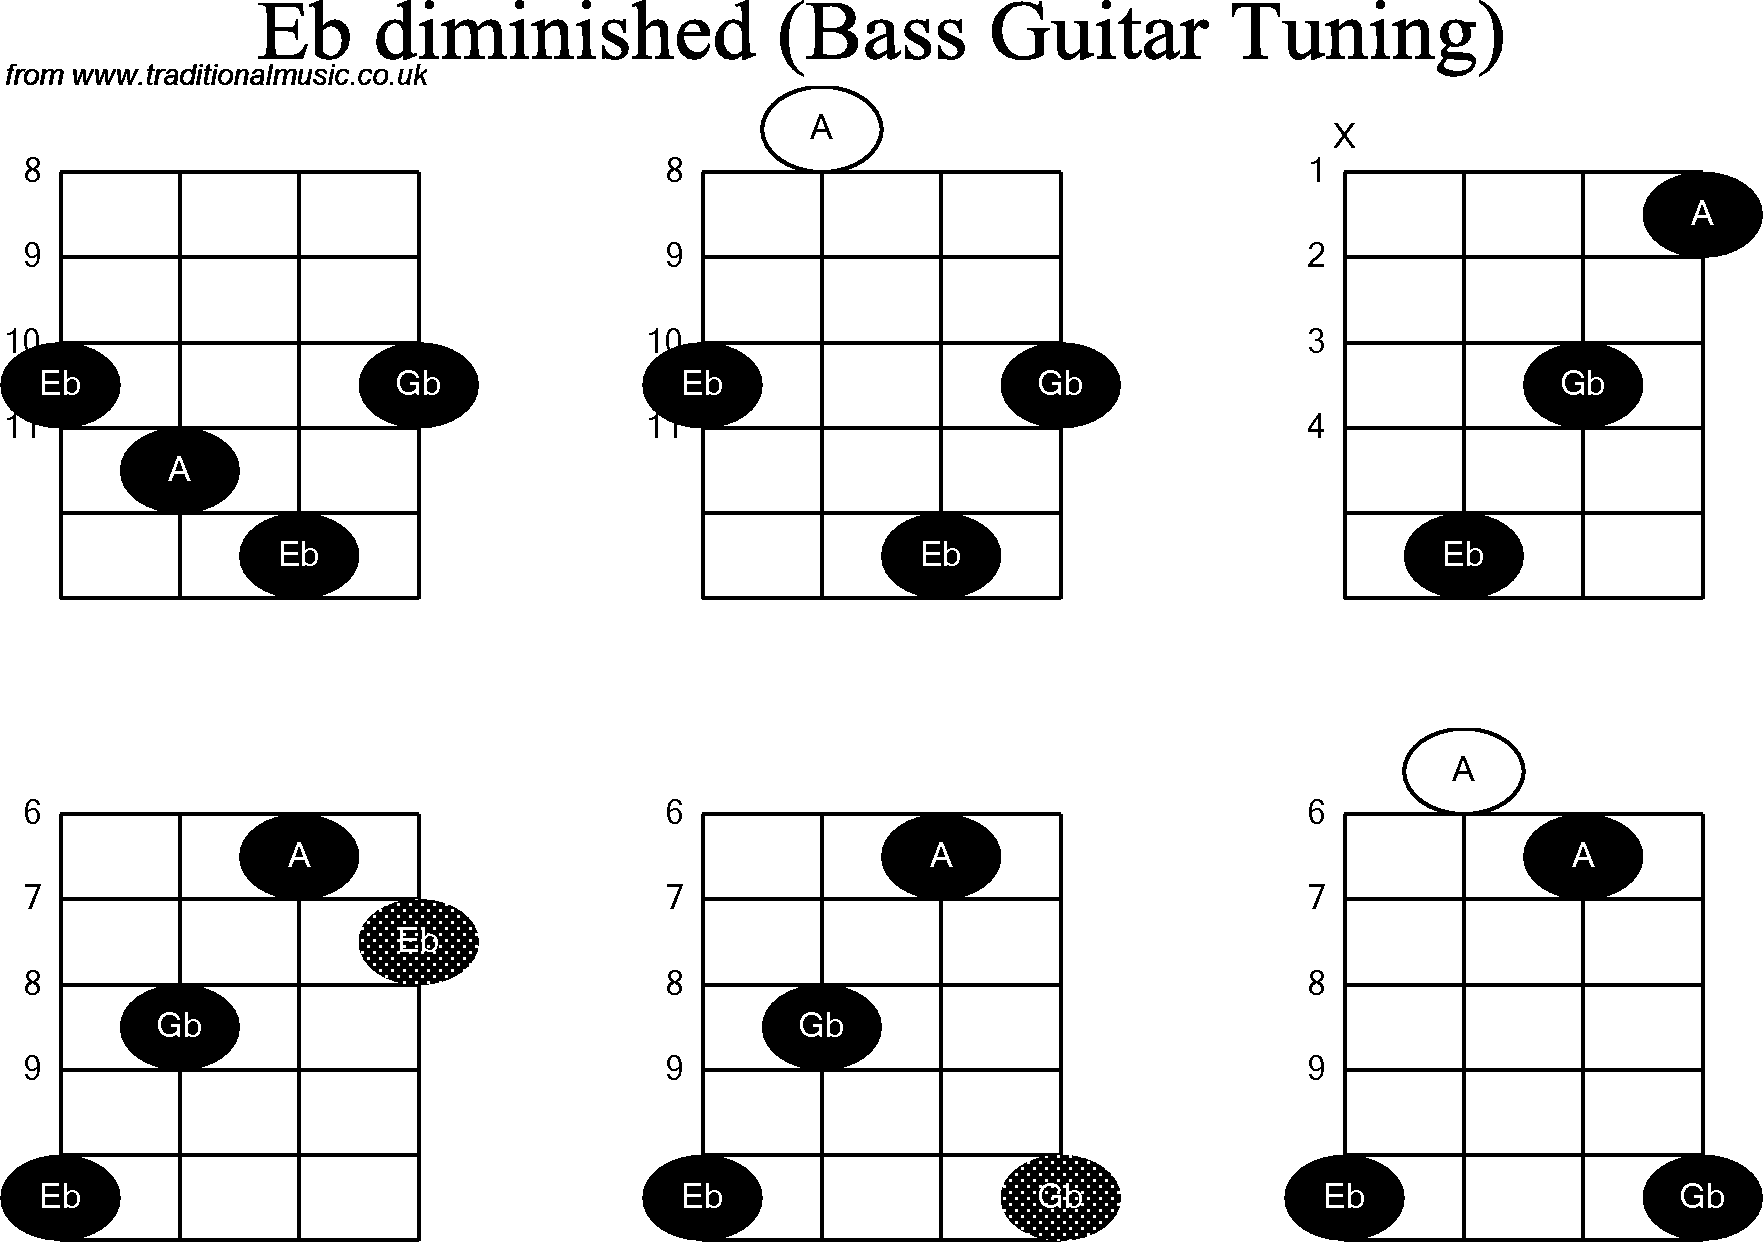 Bass Guitar chord charts for: Eb Diminished